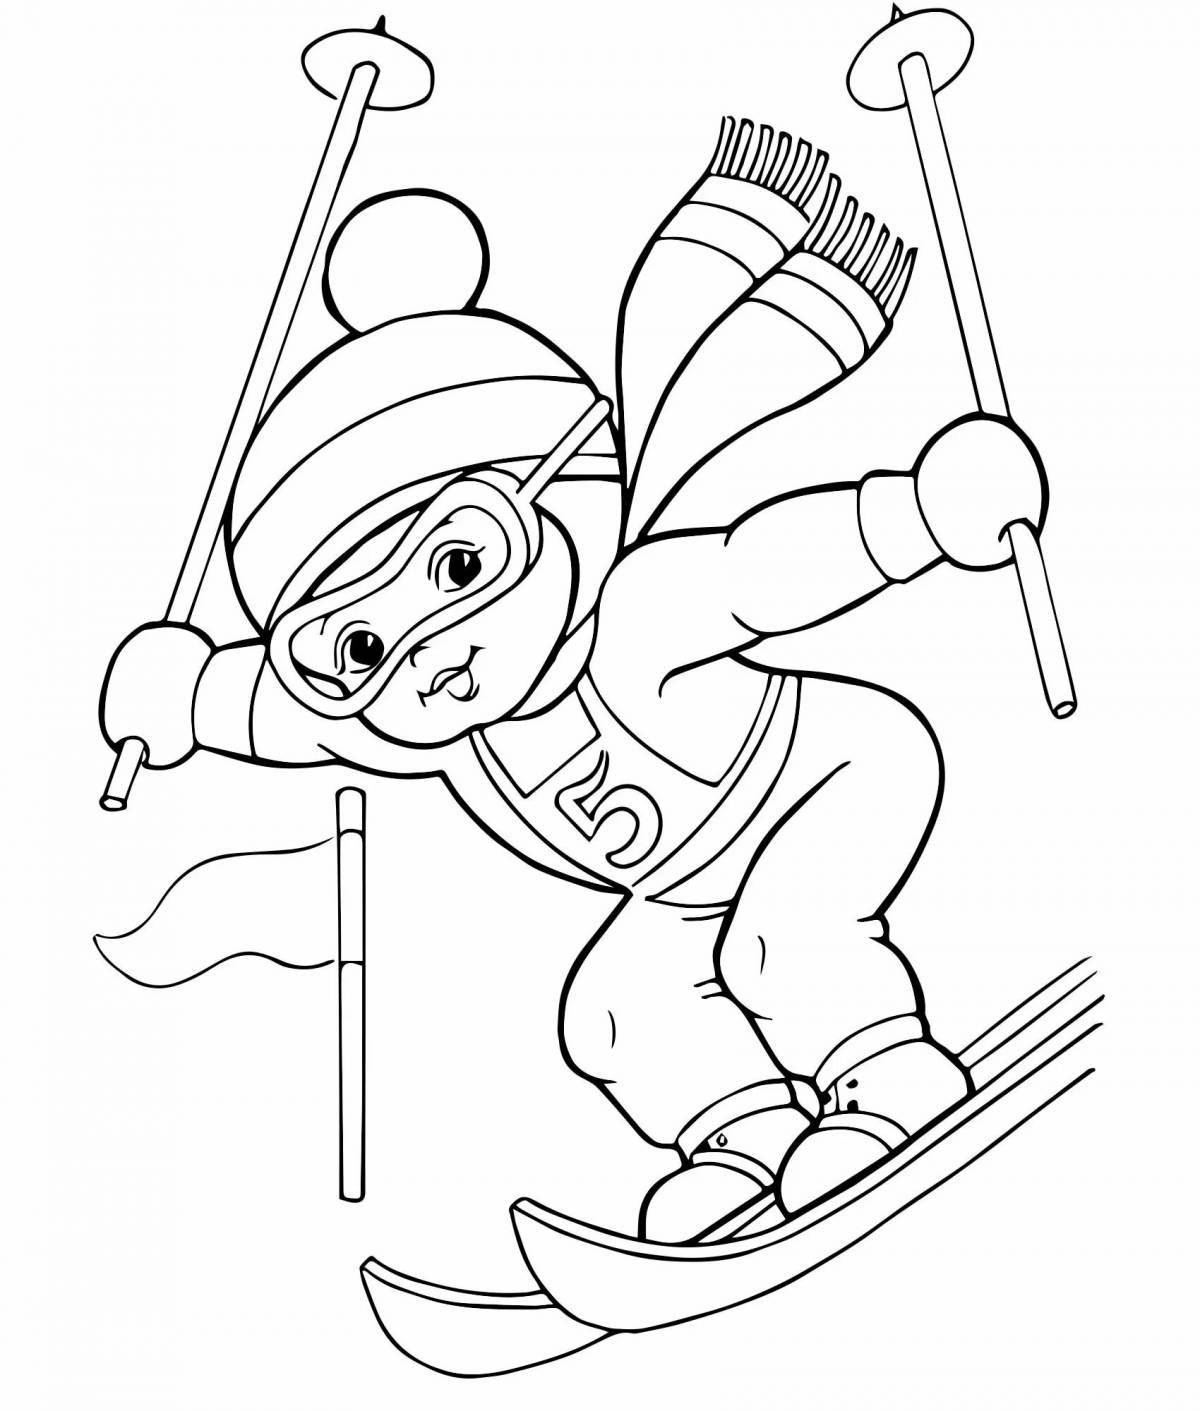 Coloring page happy baby skier